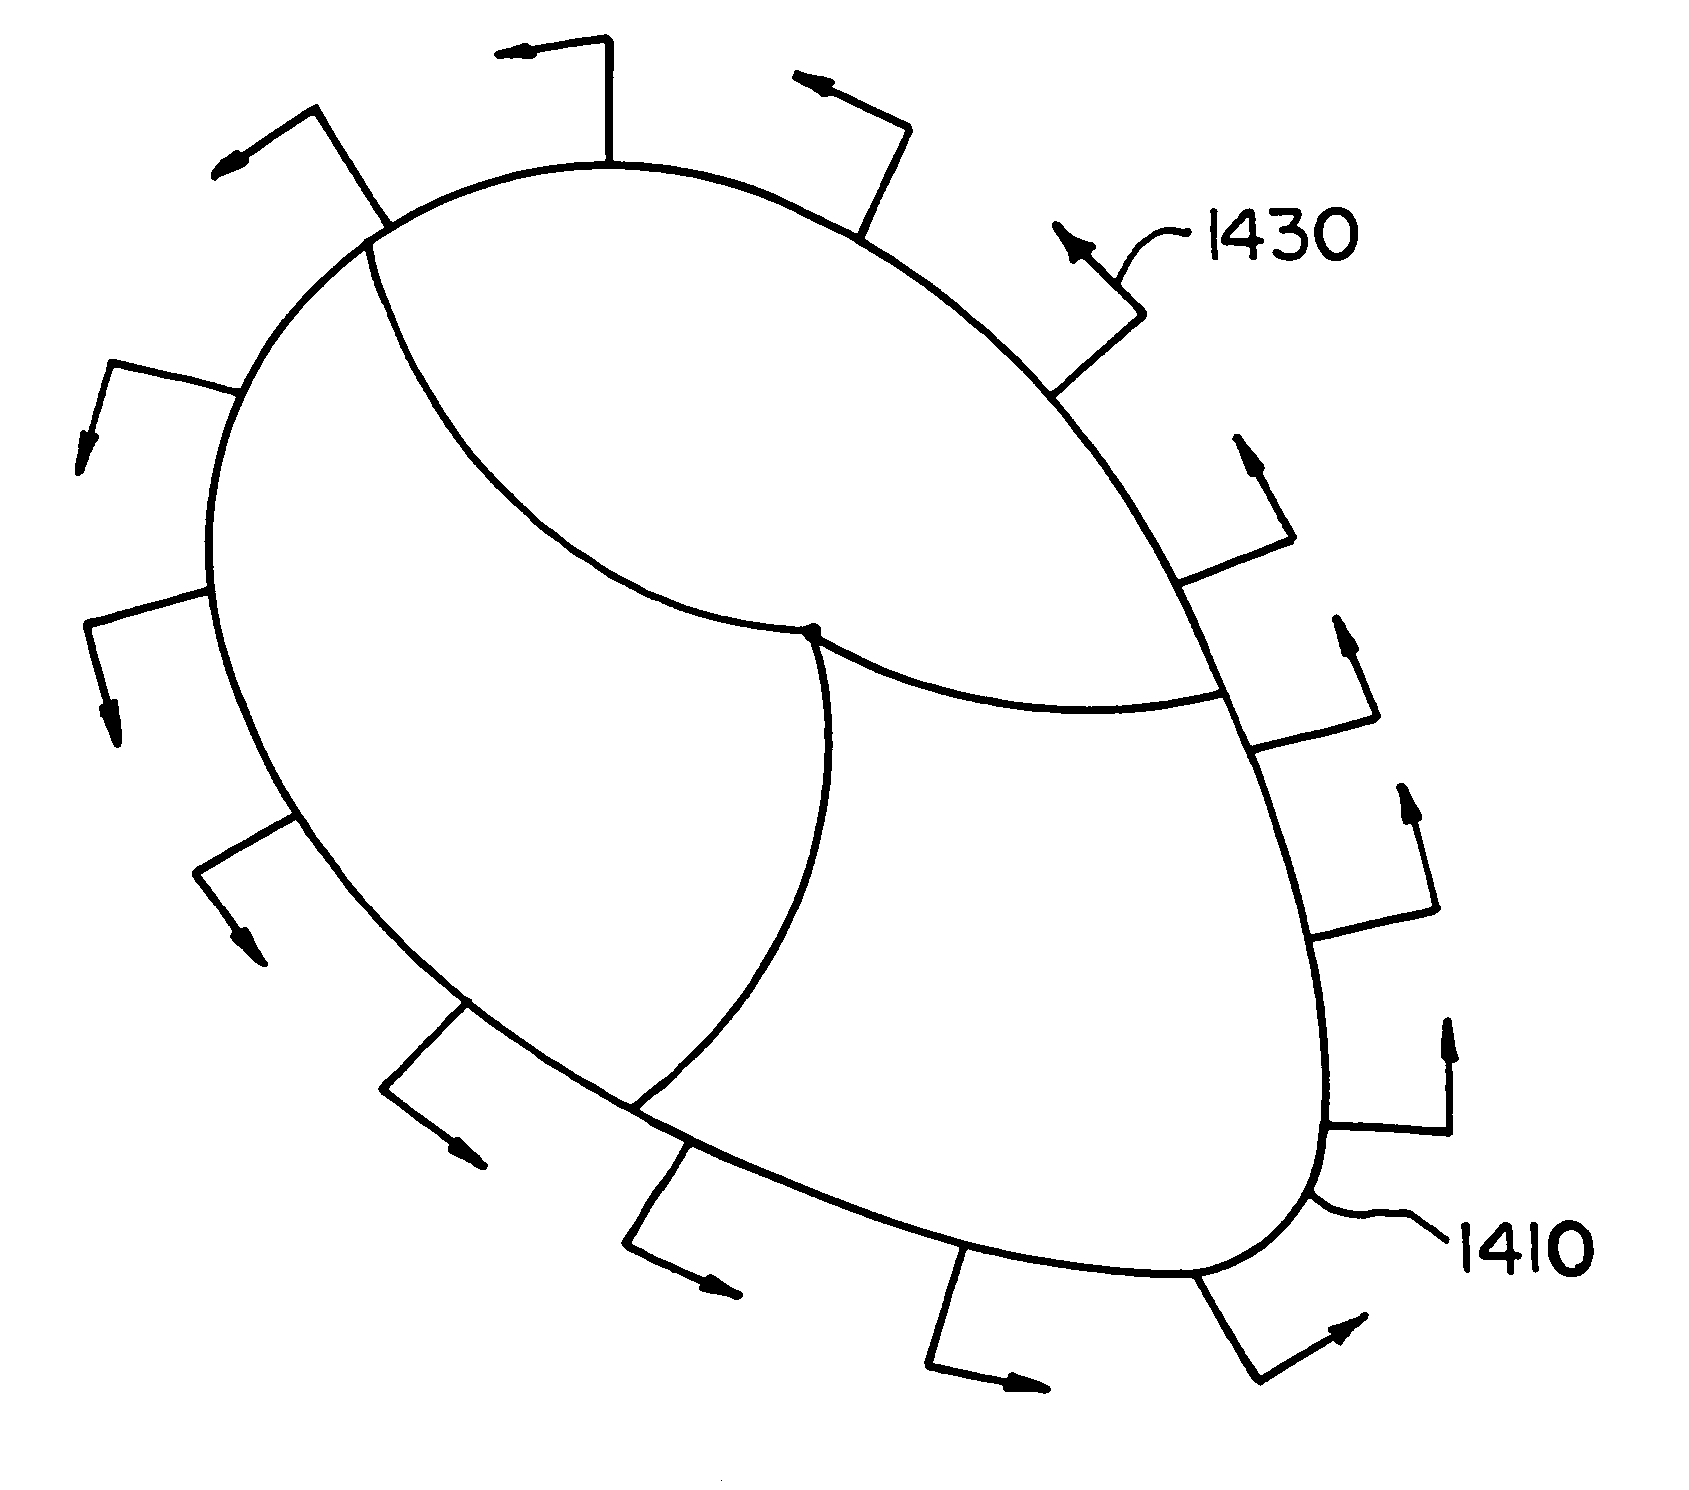 Artificial heart valve attachment apparatus and methods